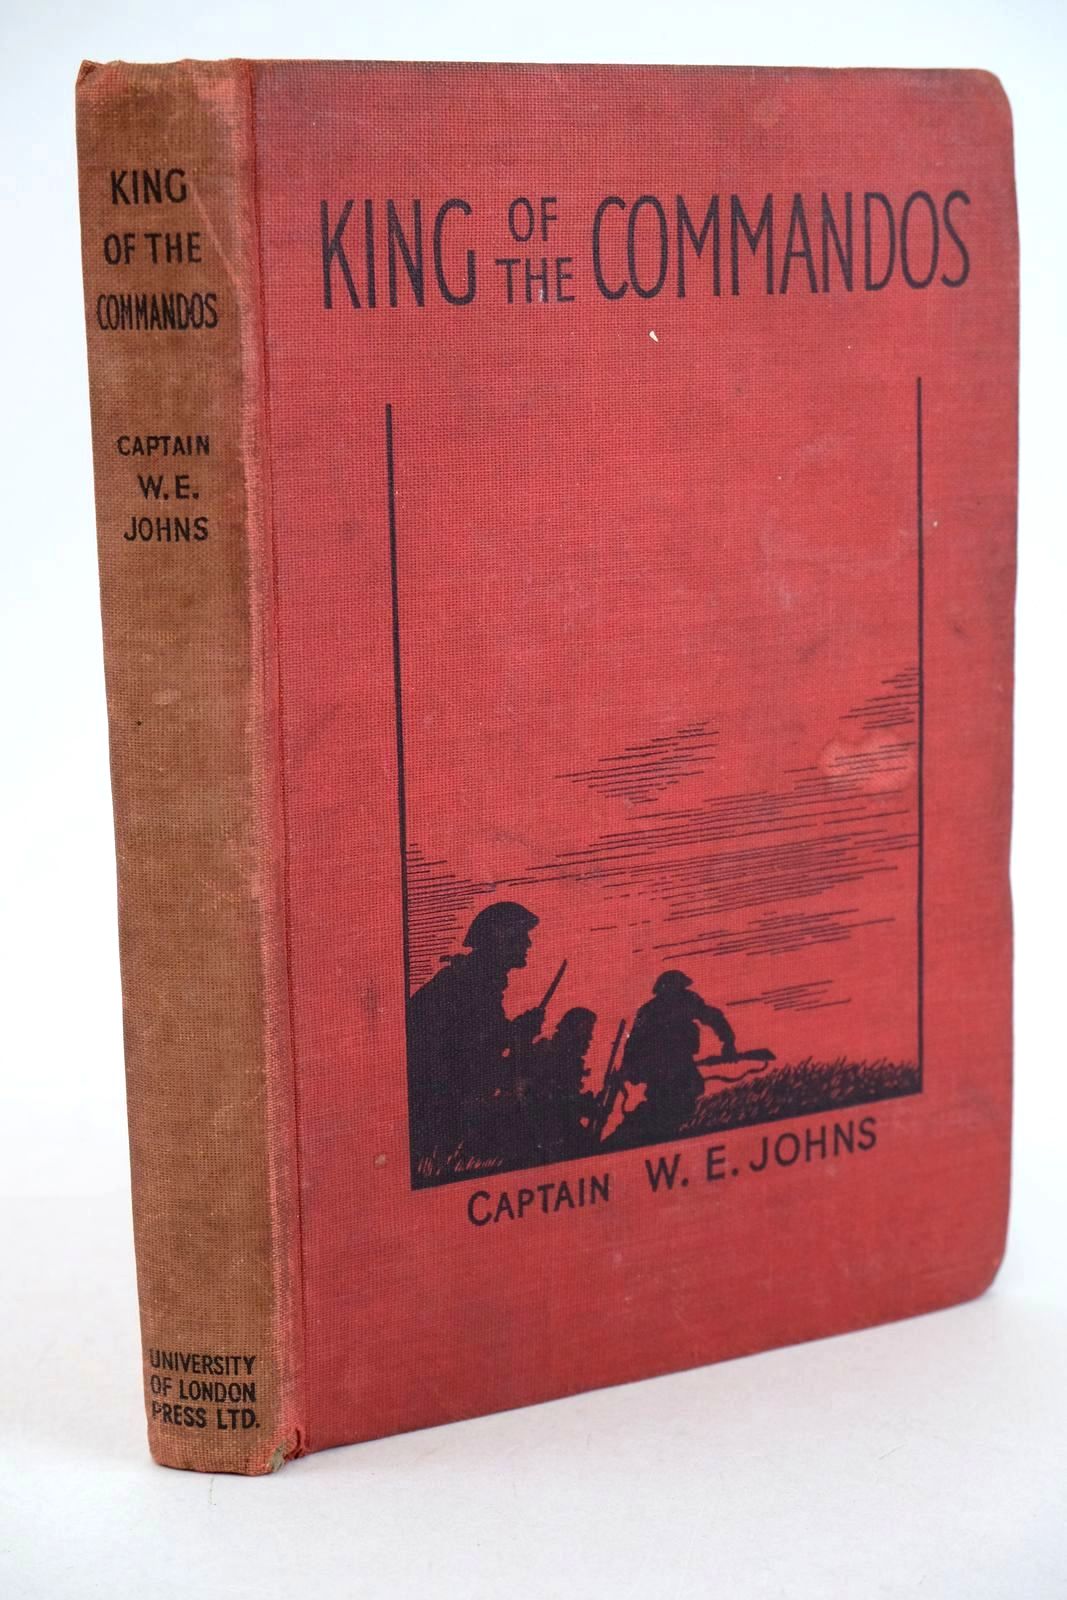 Photo of KING OF THE COMMANDOS written by Johns, W.E. illustrated by Stead,  published by University of London Press Ltd. (STOCK CODE: 1327269)  for sale by Stella & Rose's Books